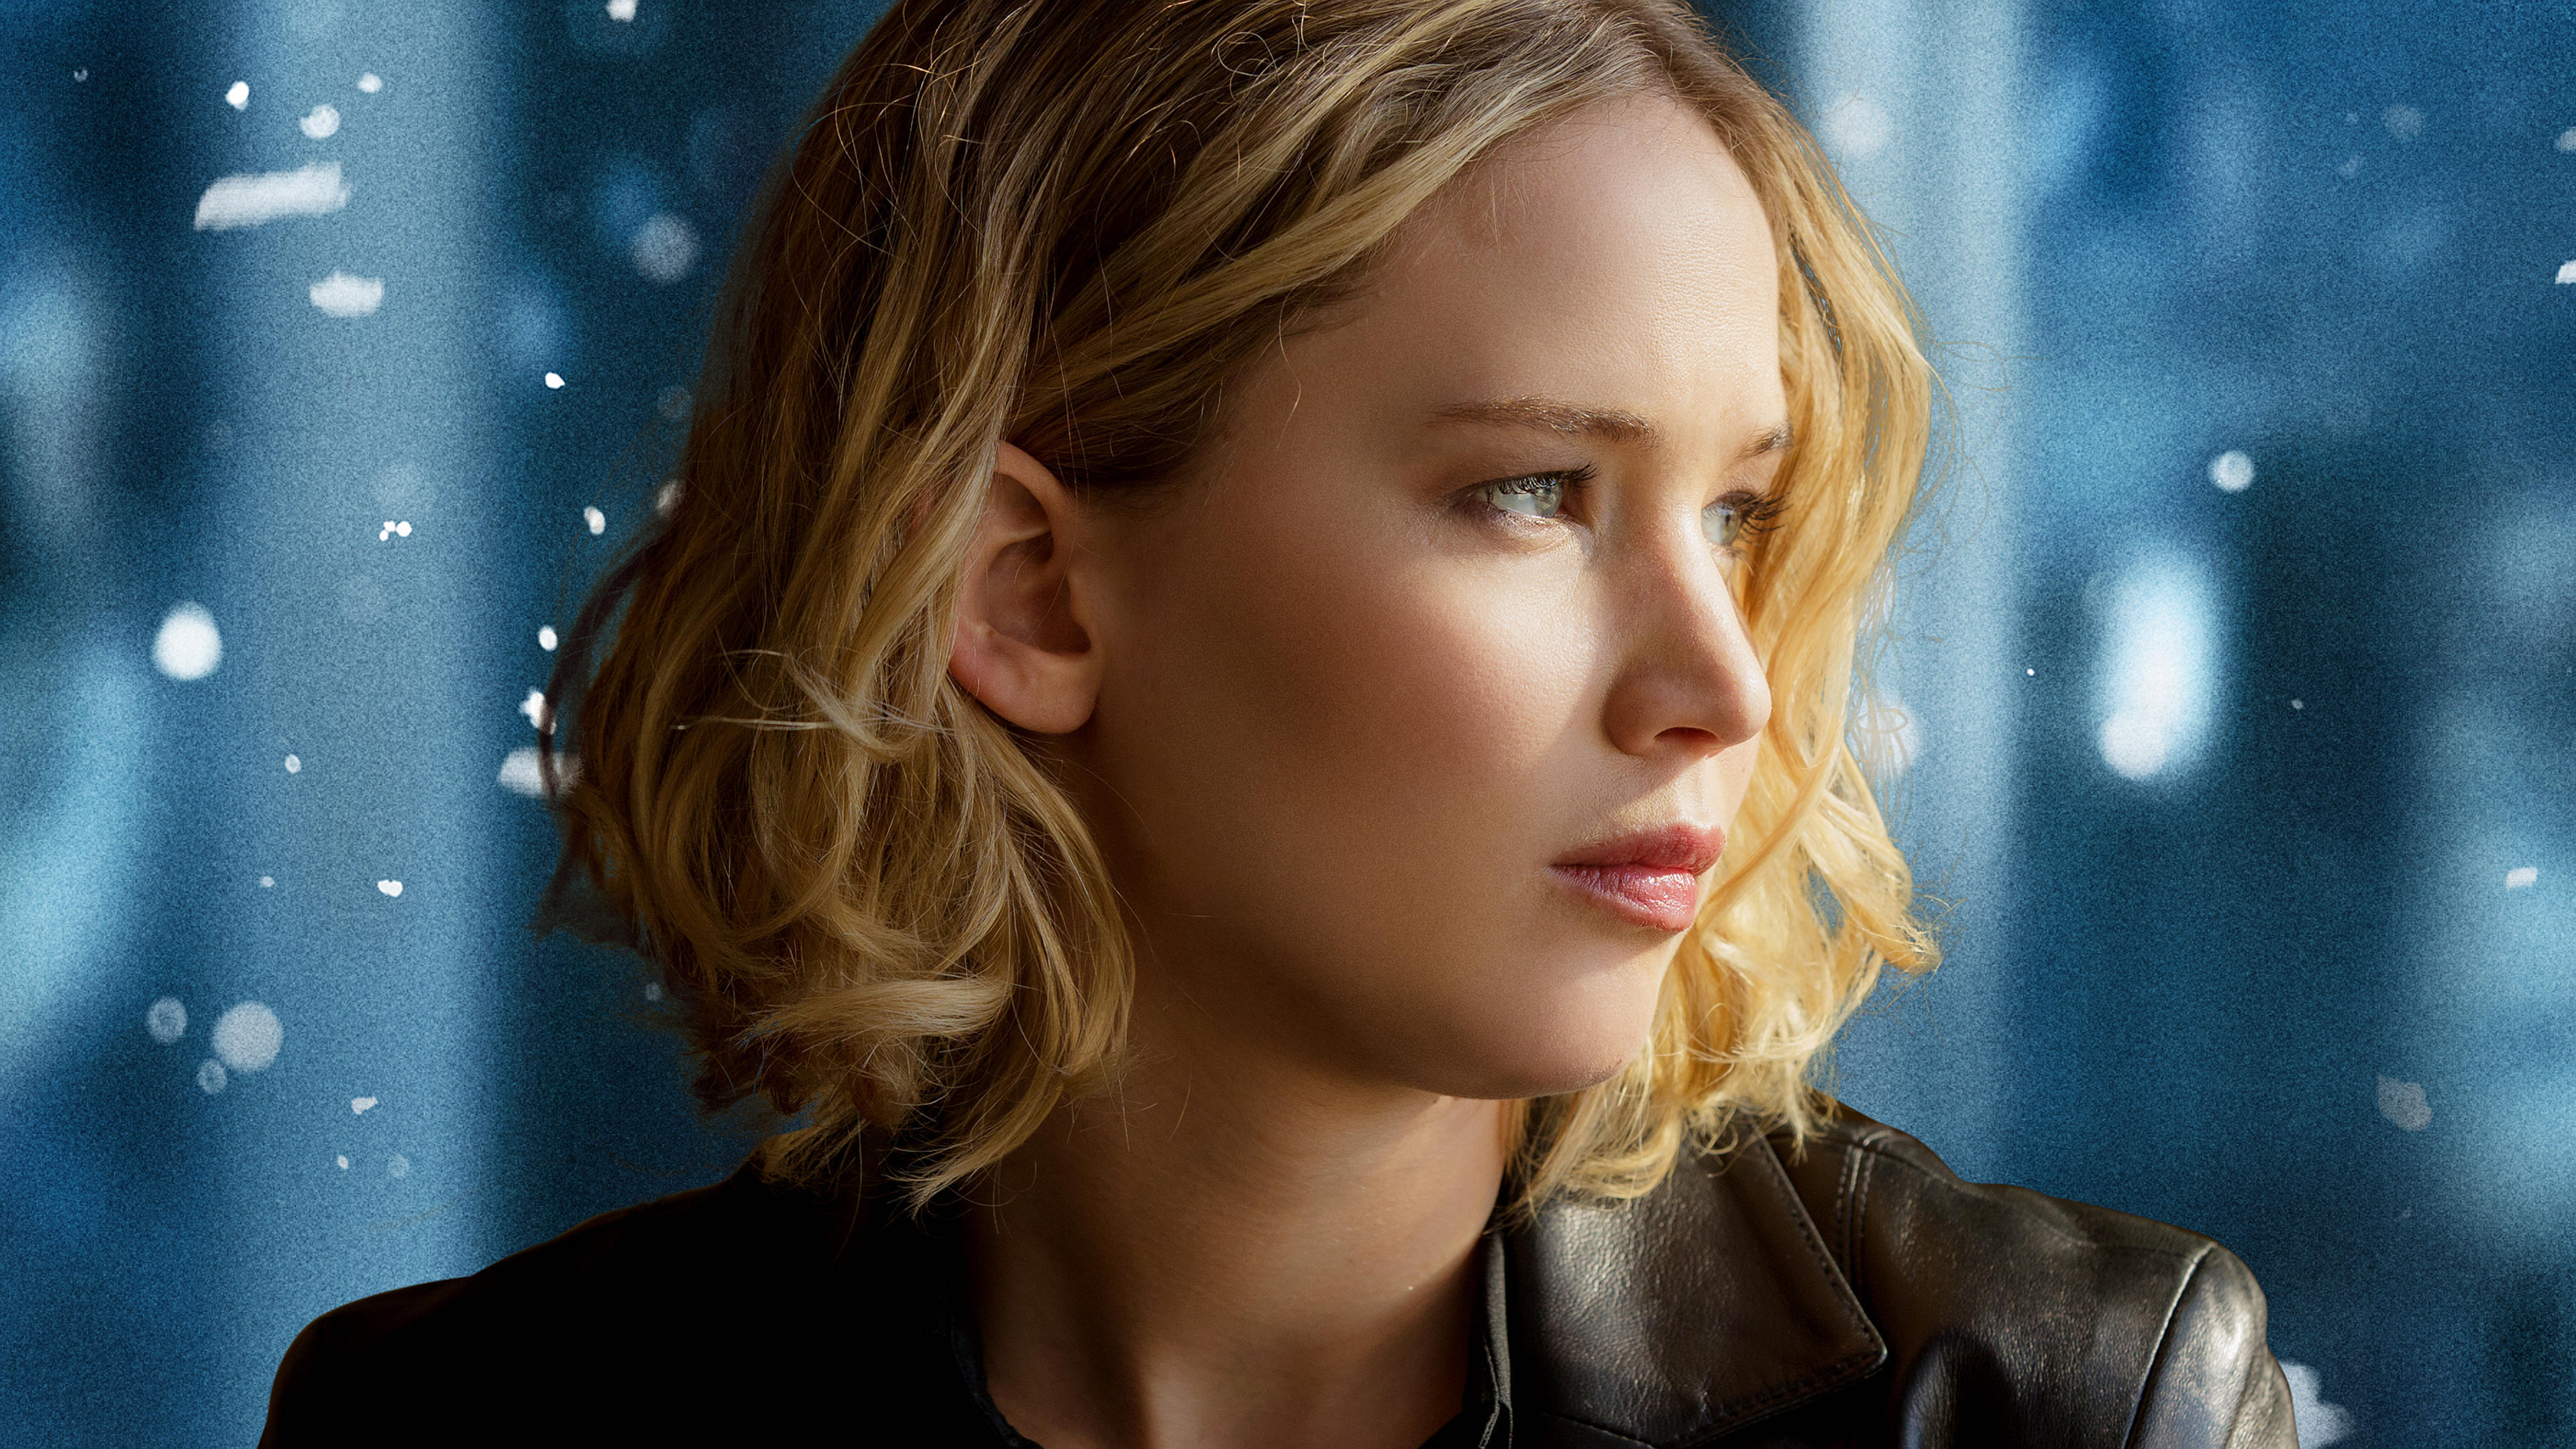 190+ Jennifer Lawrence HD Wallpapers and Backgrounds